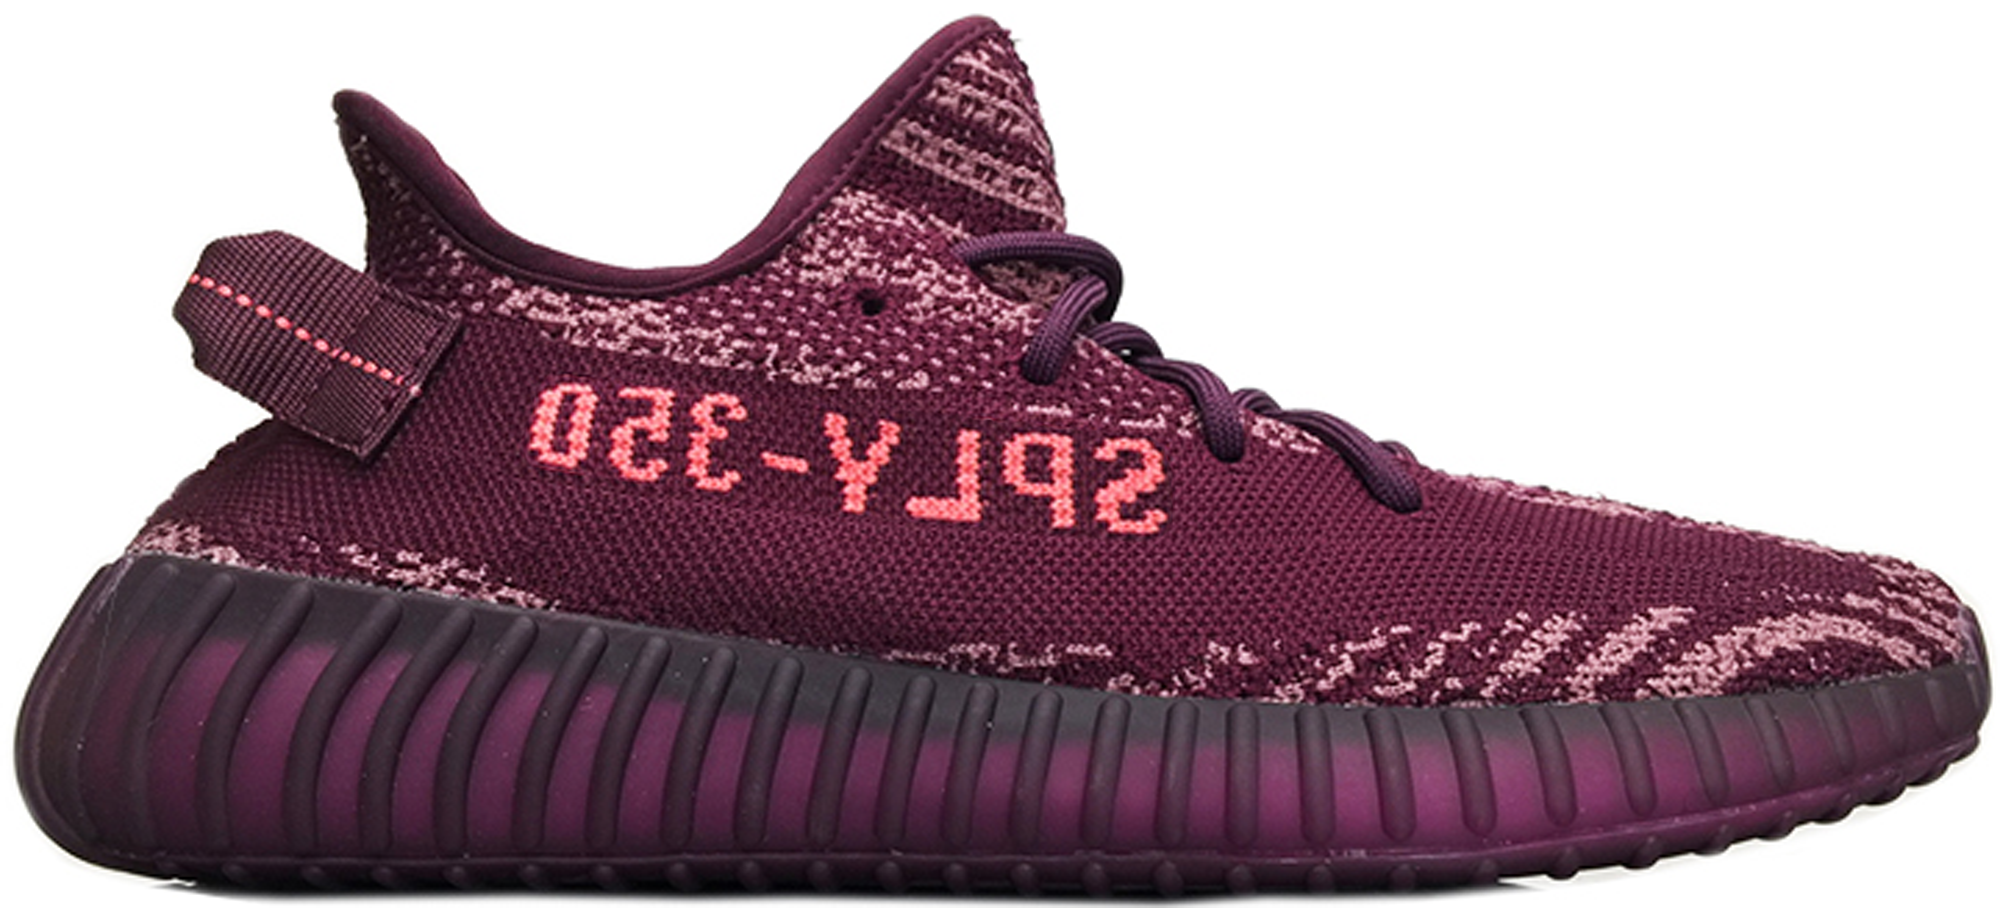 red night yeezy release date